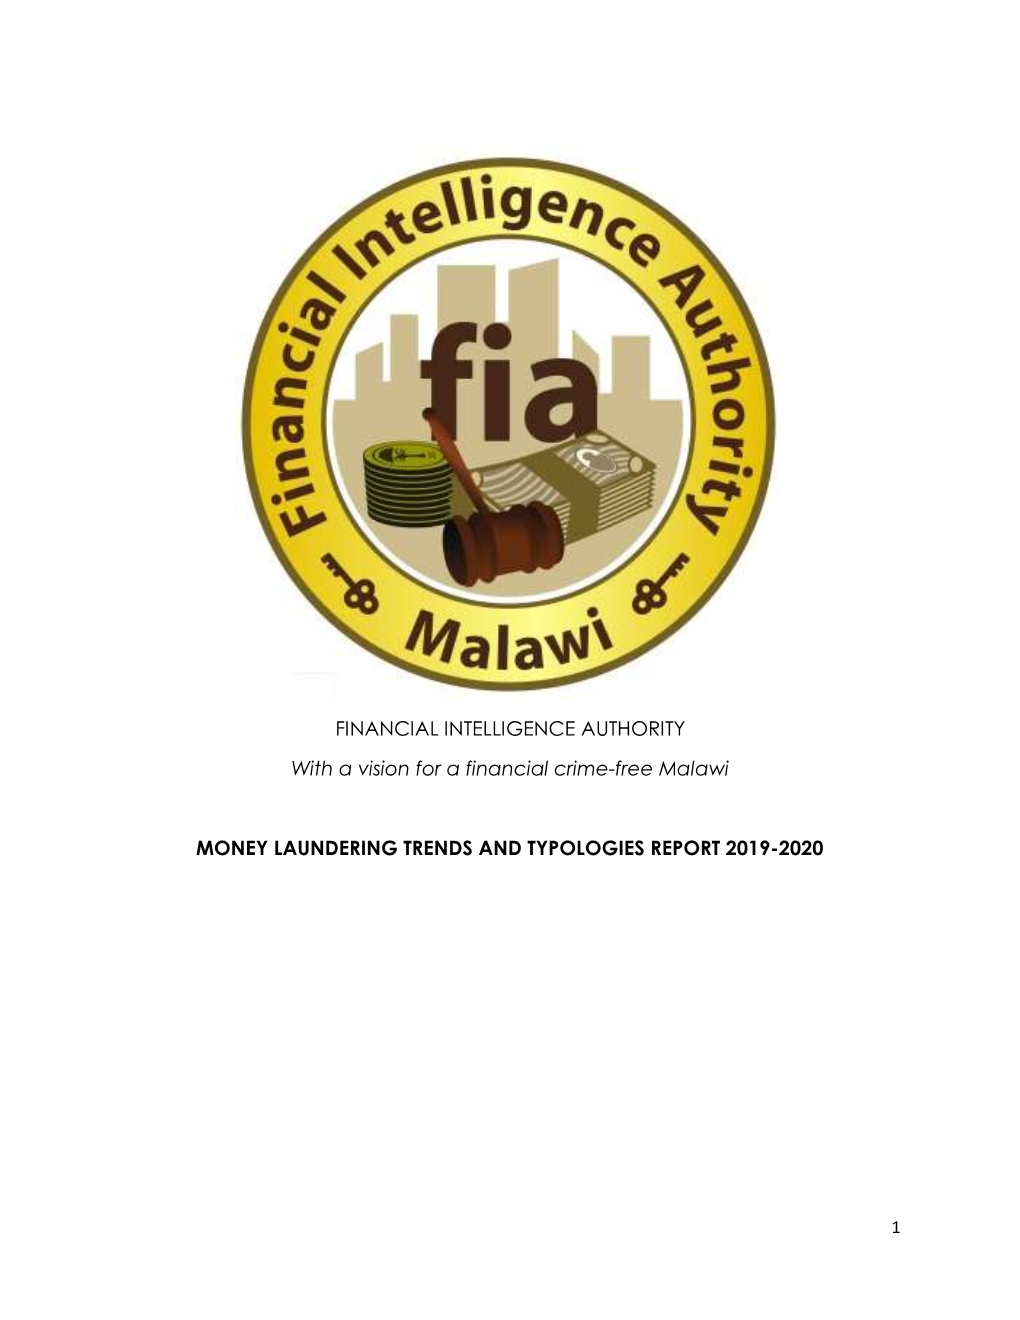 FINANCIAL INTELLIGENCE AUTHORITY with a Vision for a Financial Crime-Free Malawi